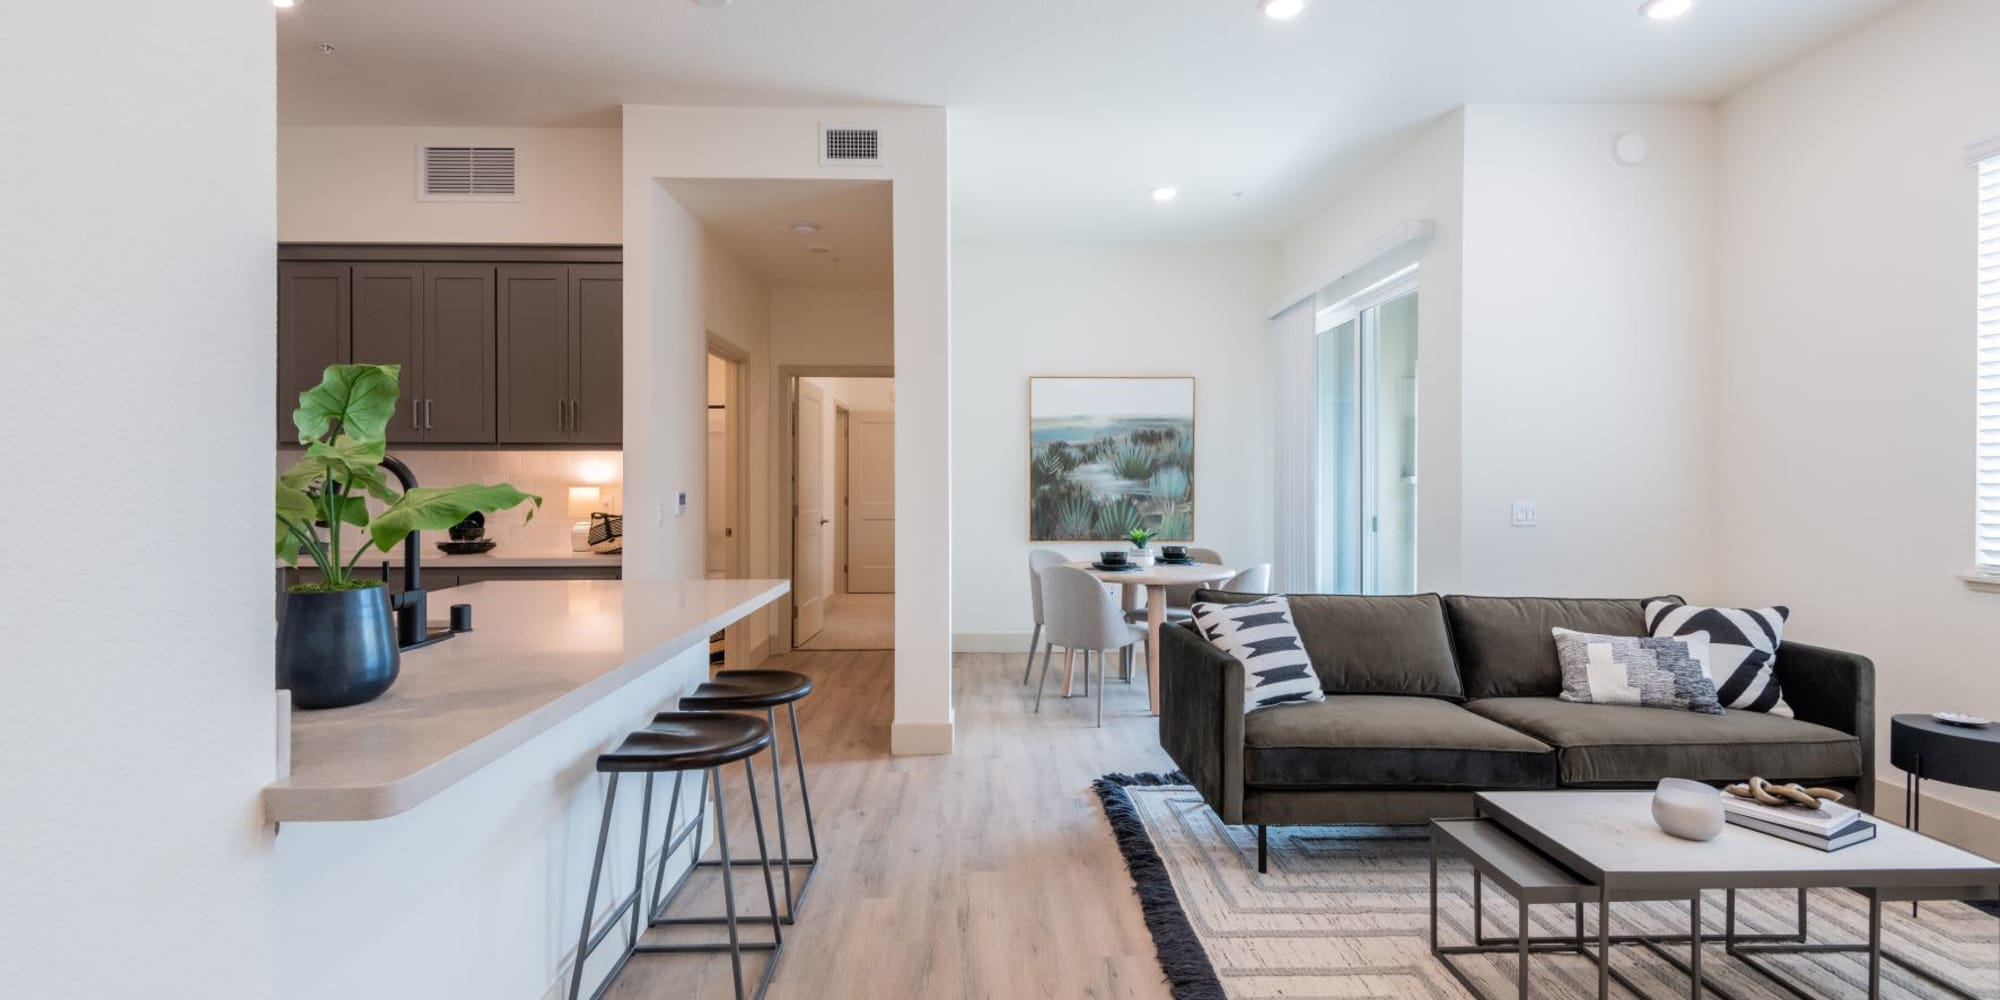 Spacious living room with wood-style flooring at Towne Centre Apartments in Lathrop, California